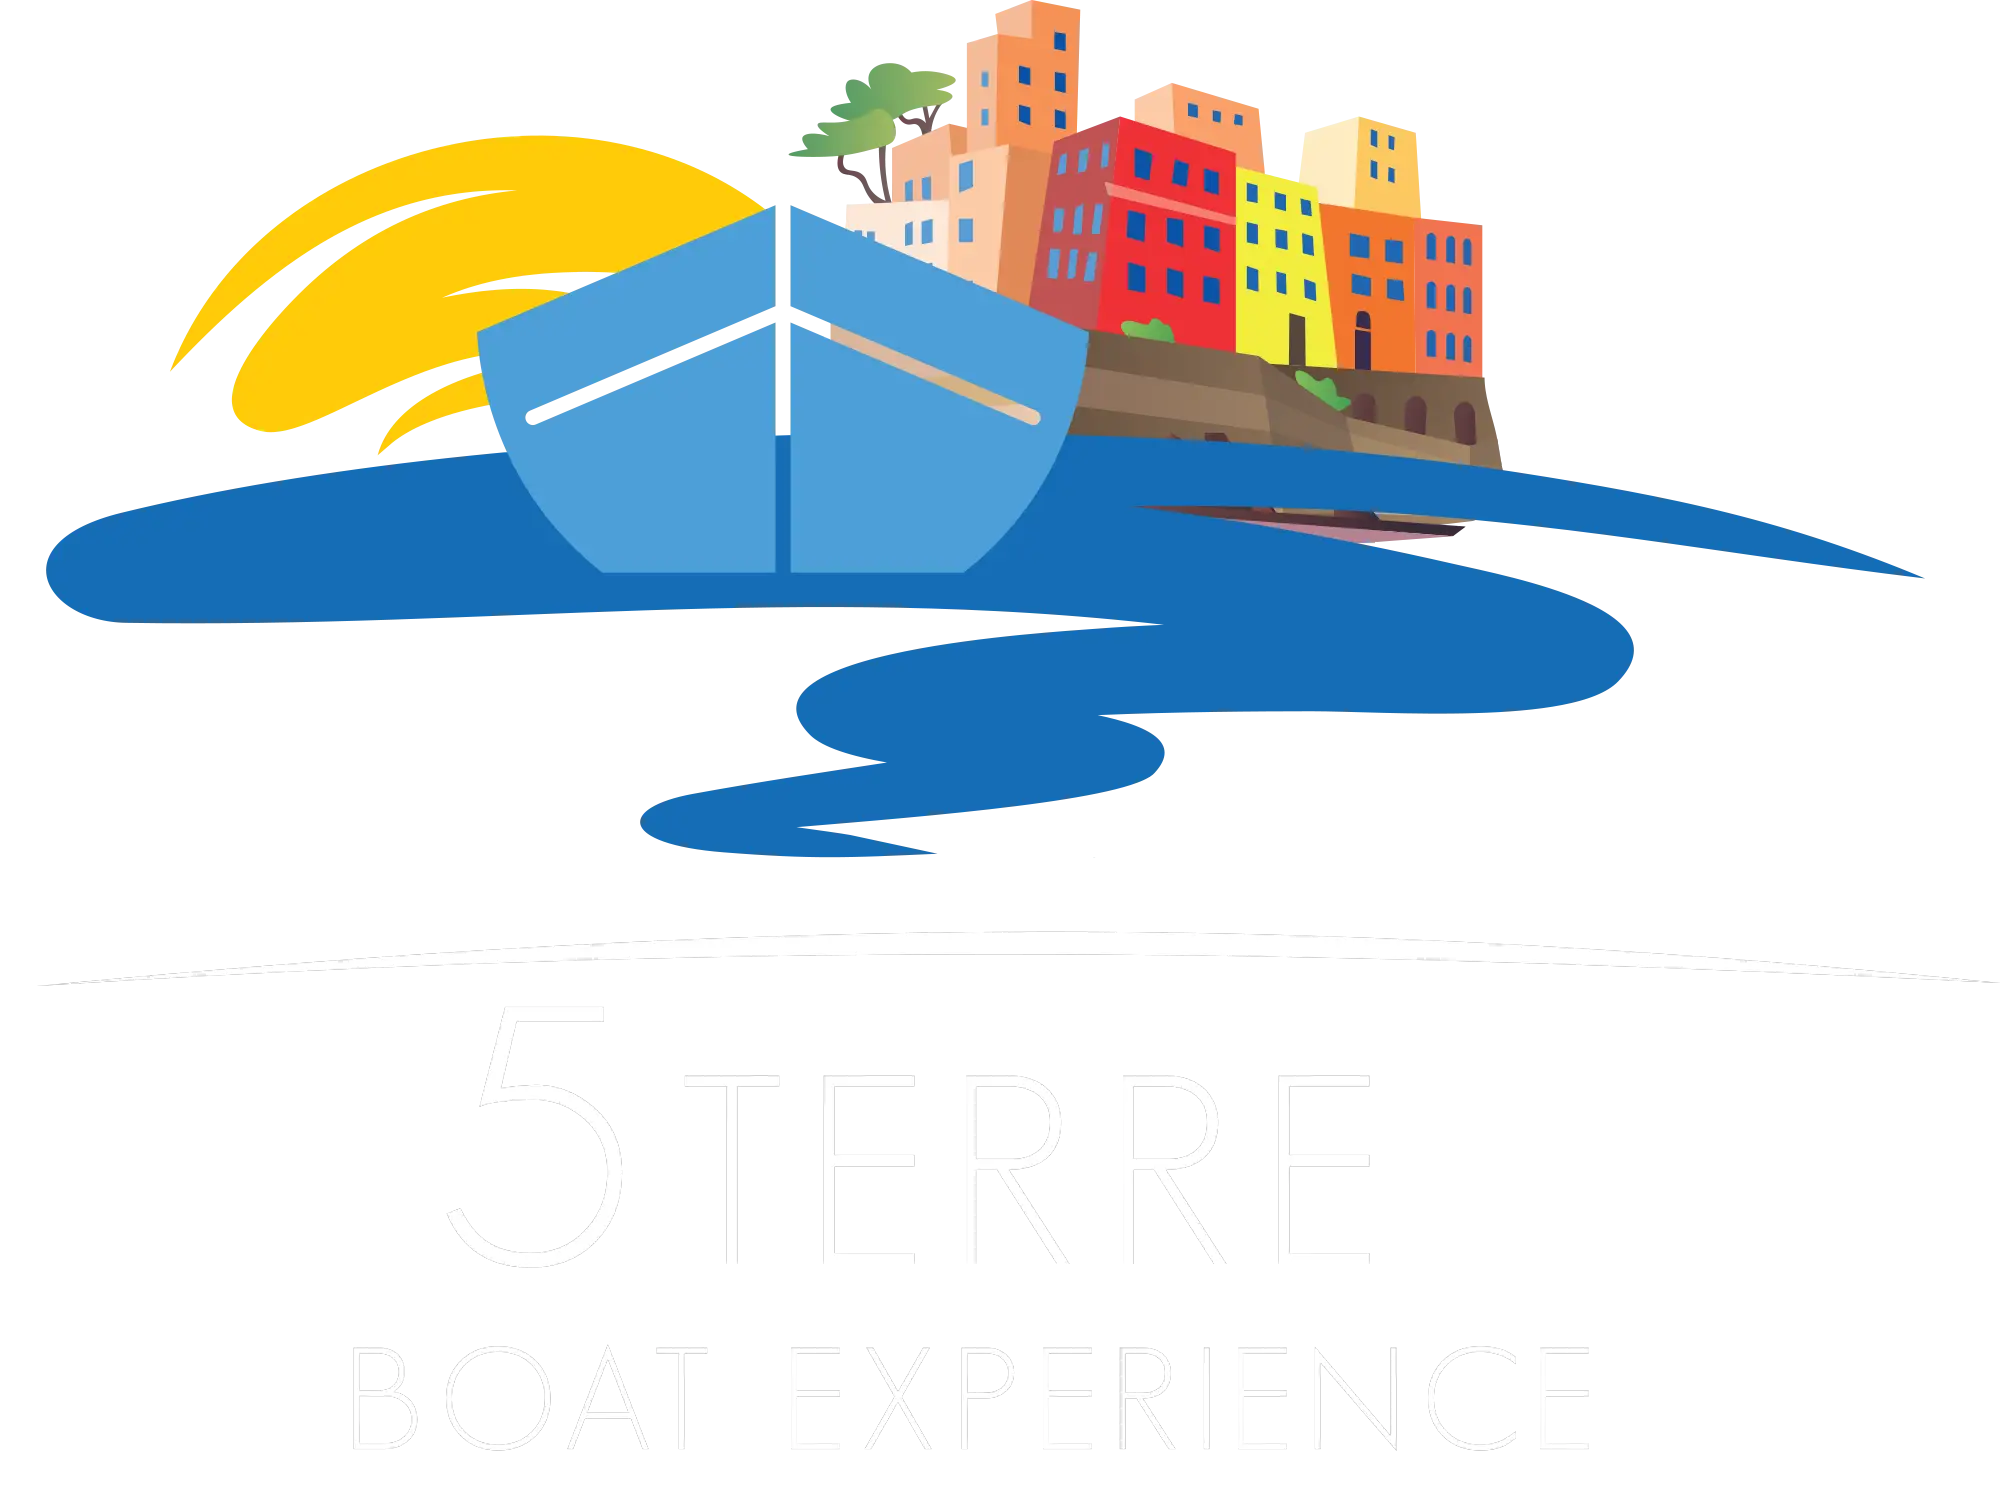 5 Terre boat experience